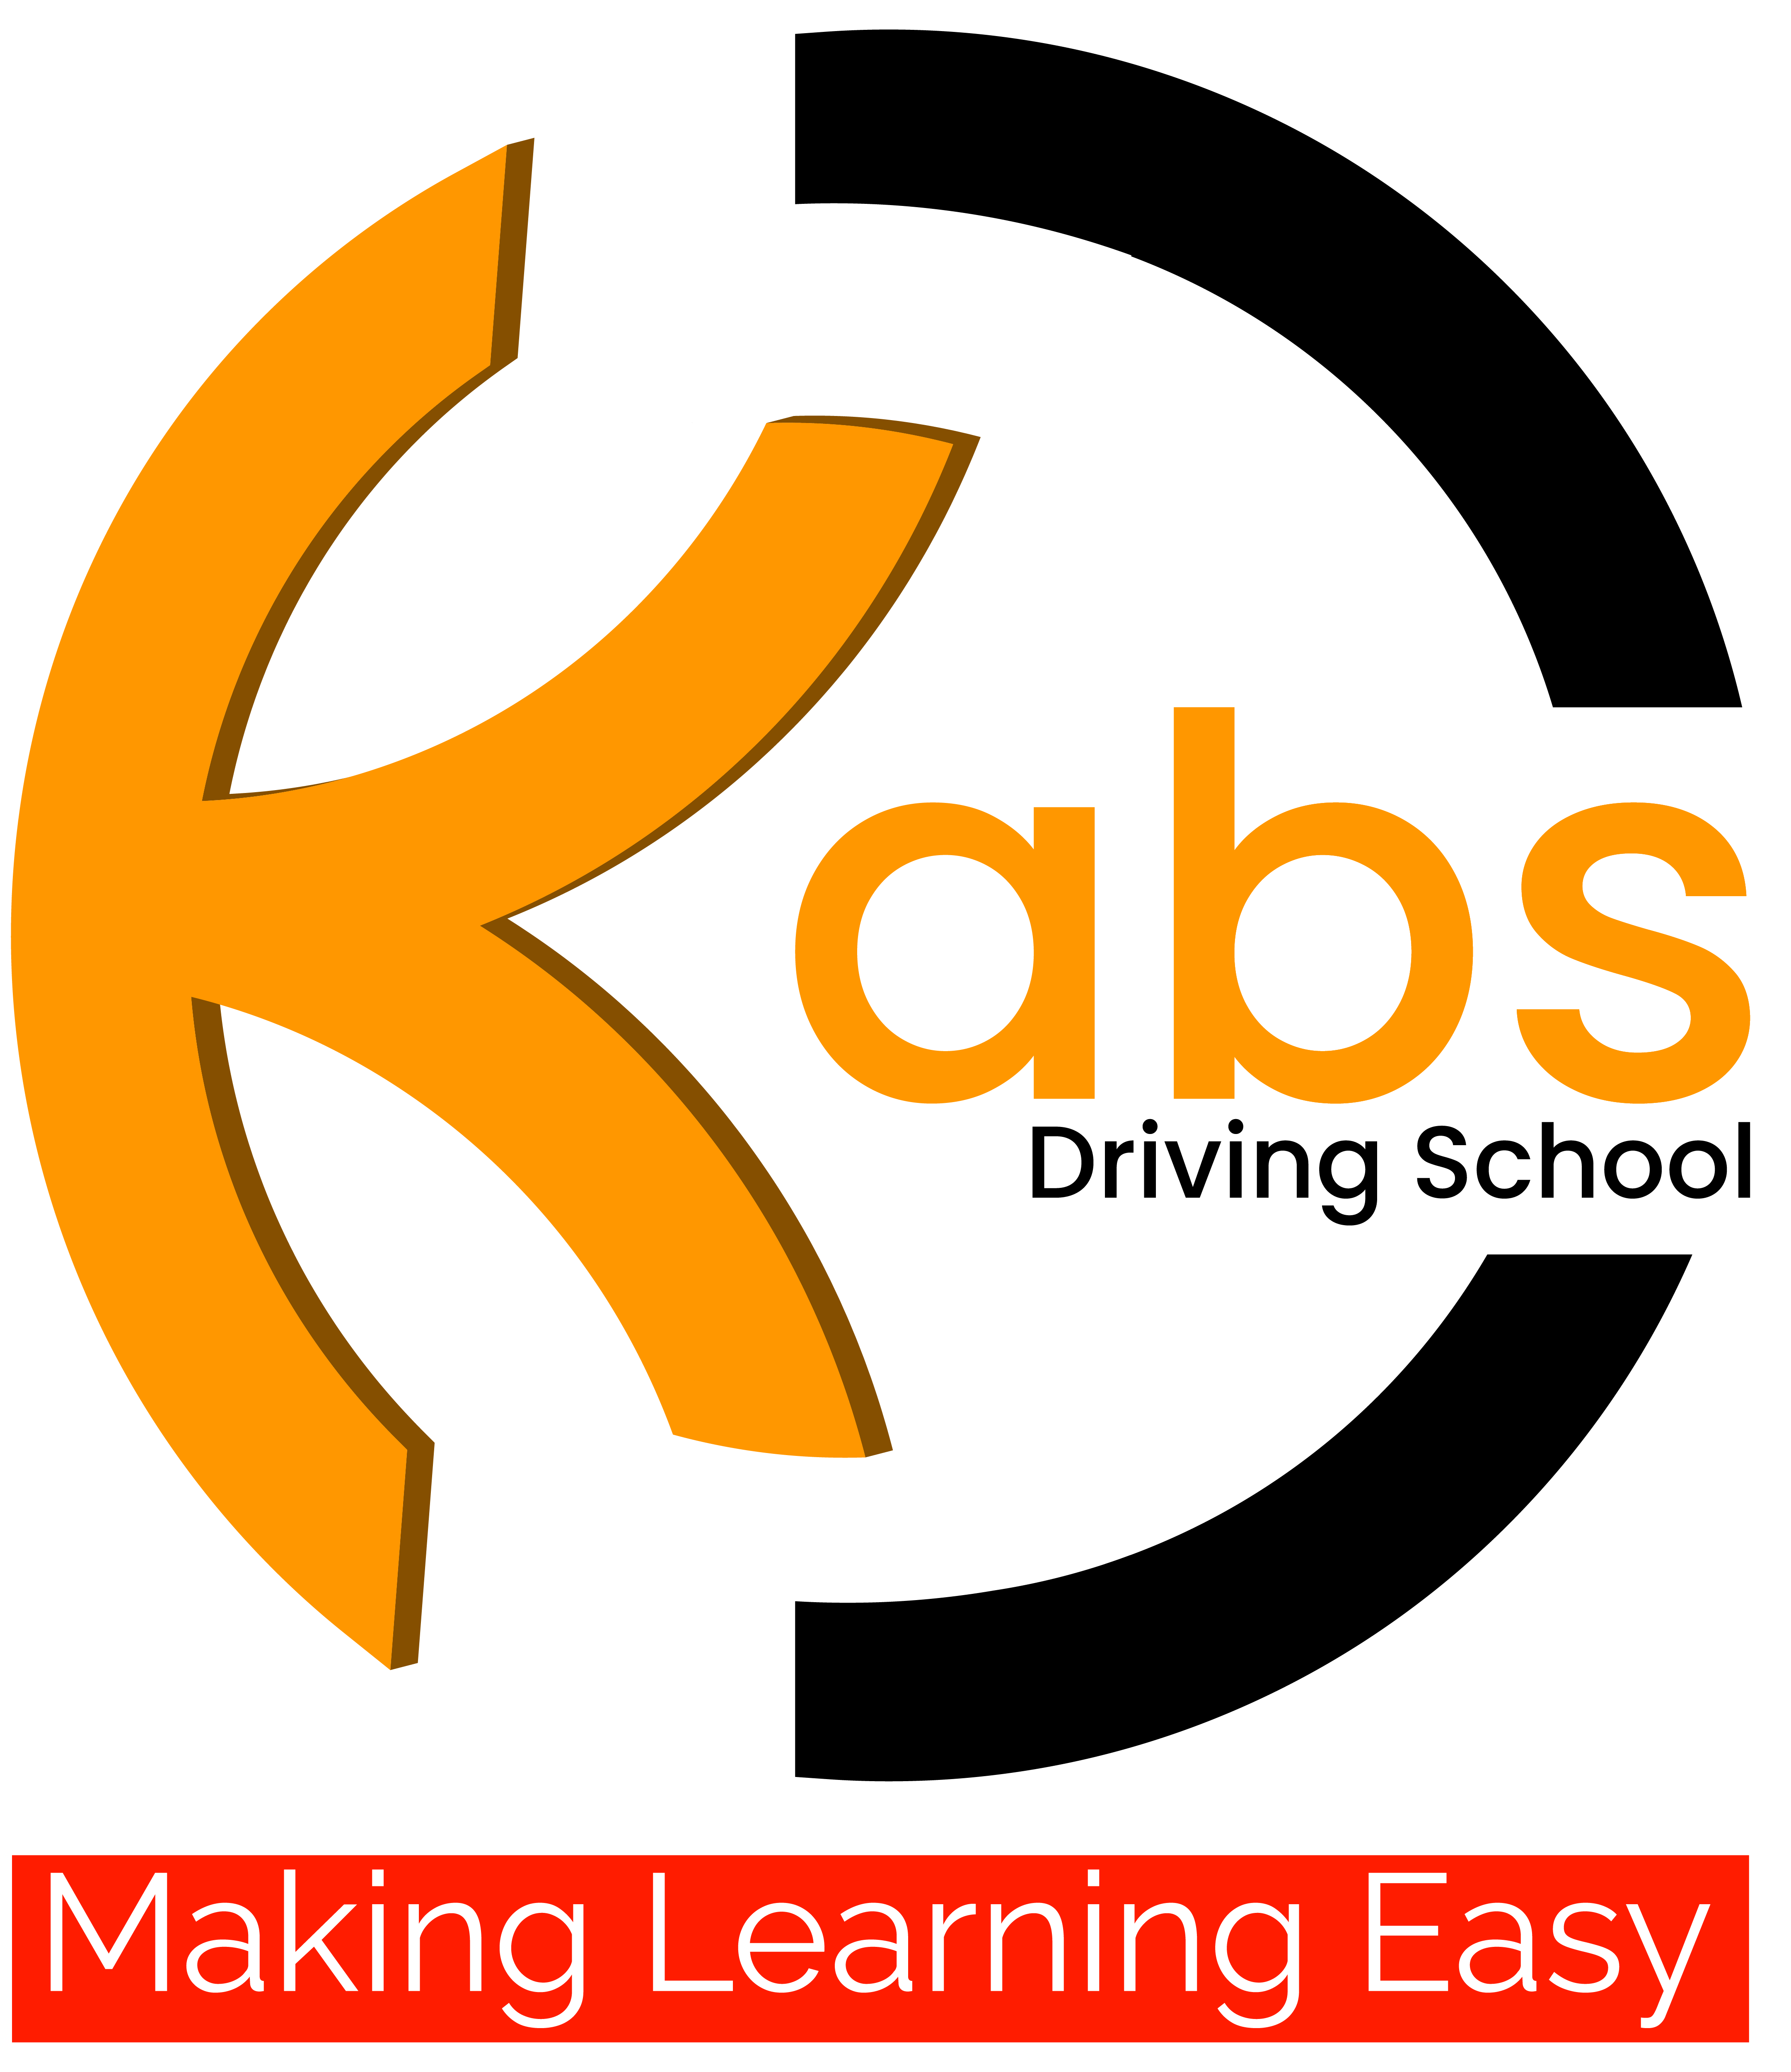 near best manual auto transmission driving instructor north london kabs driving school